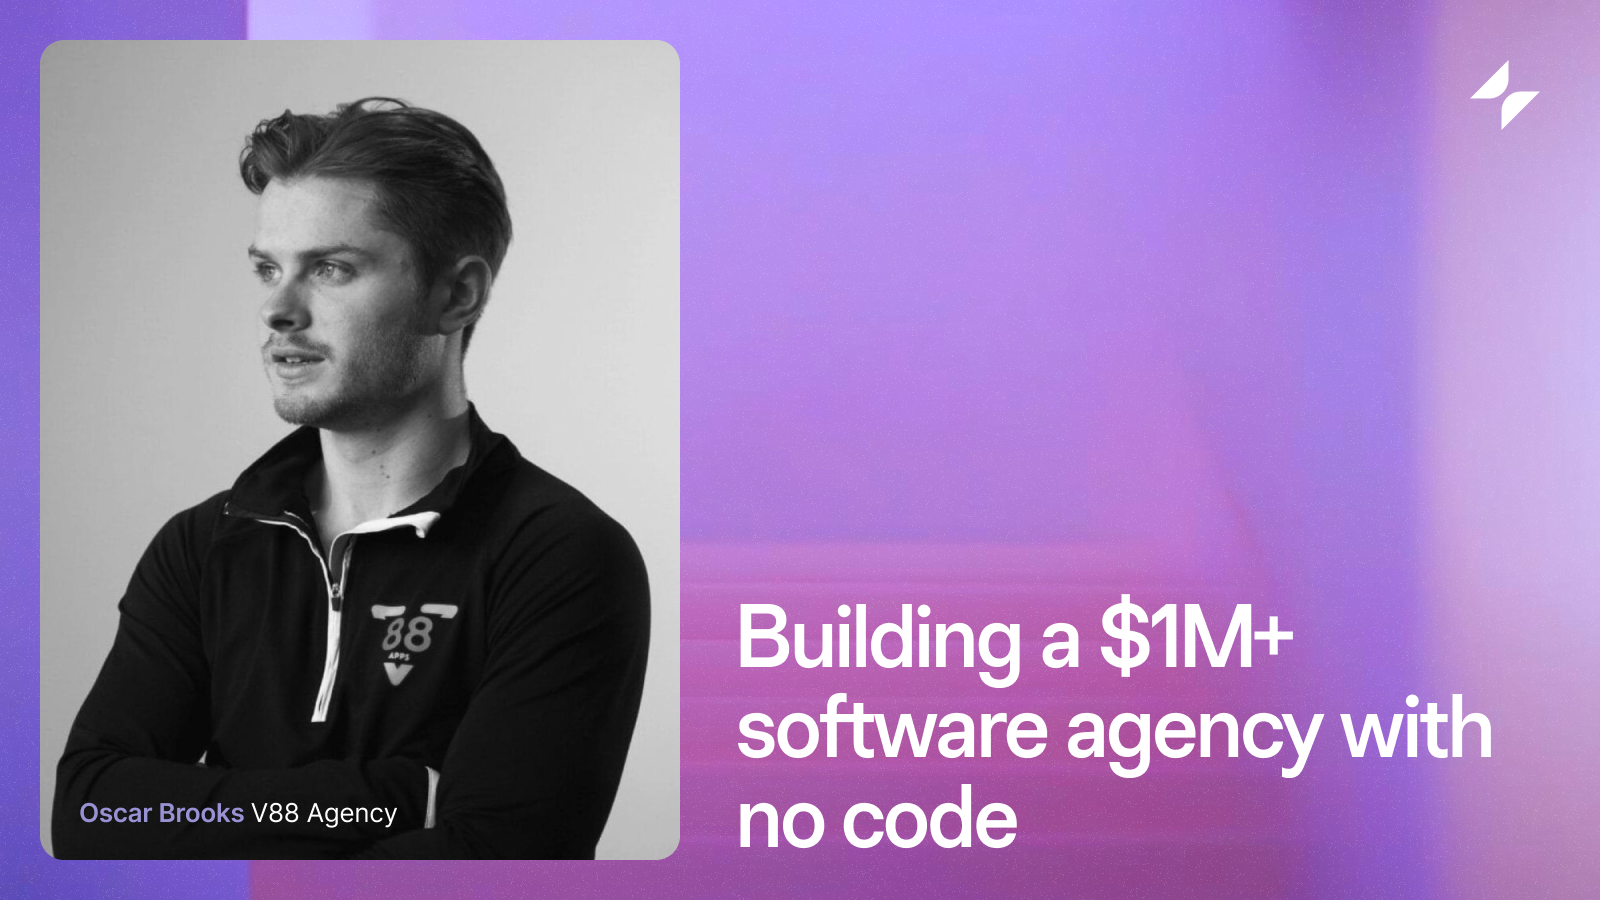 Building a $1M+ software agency with no code